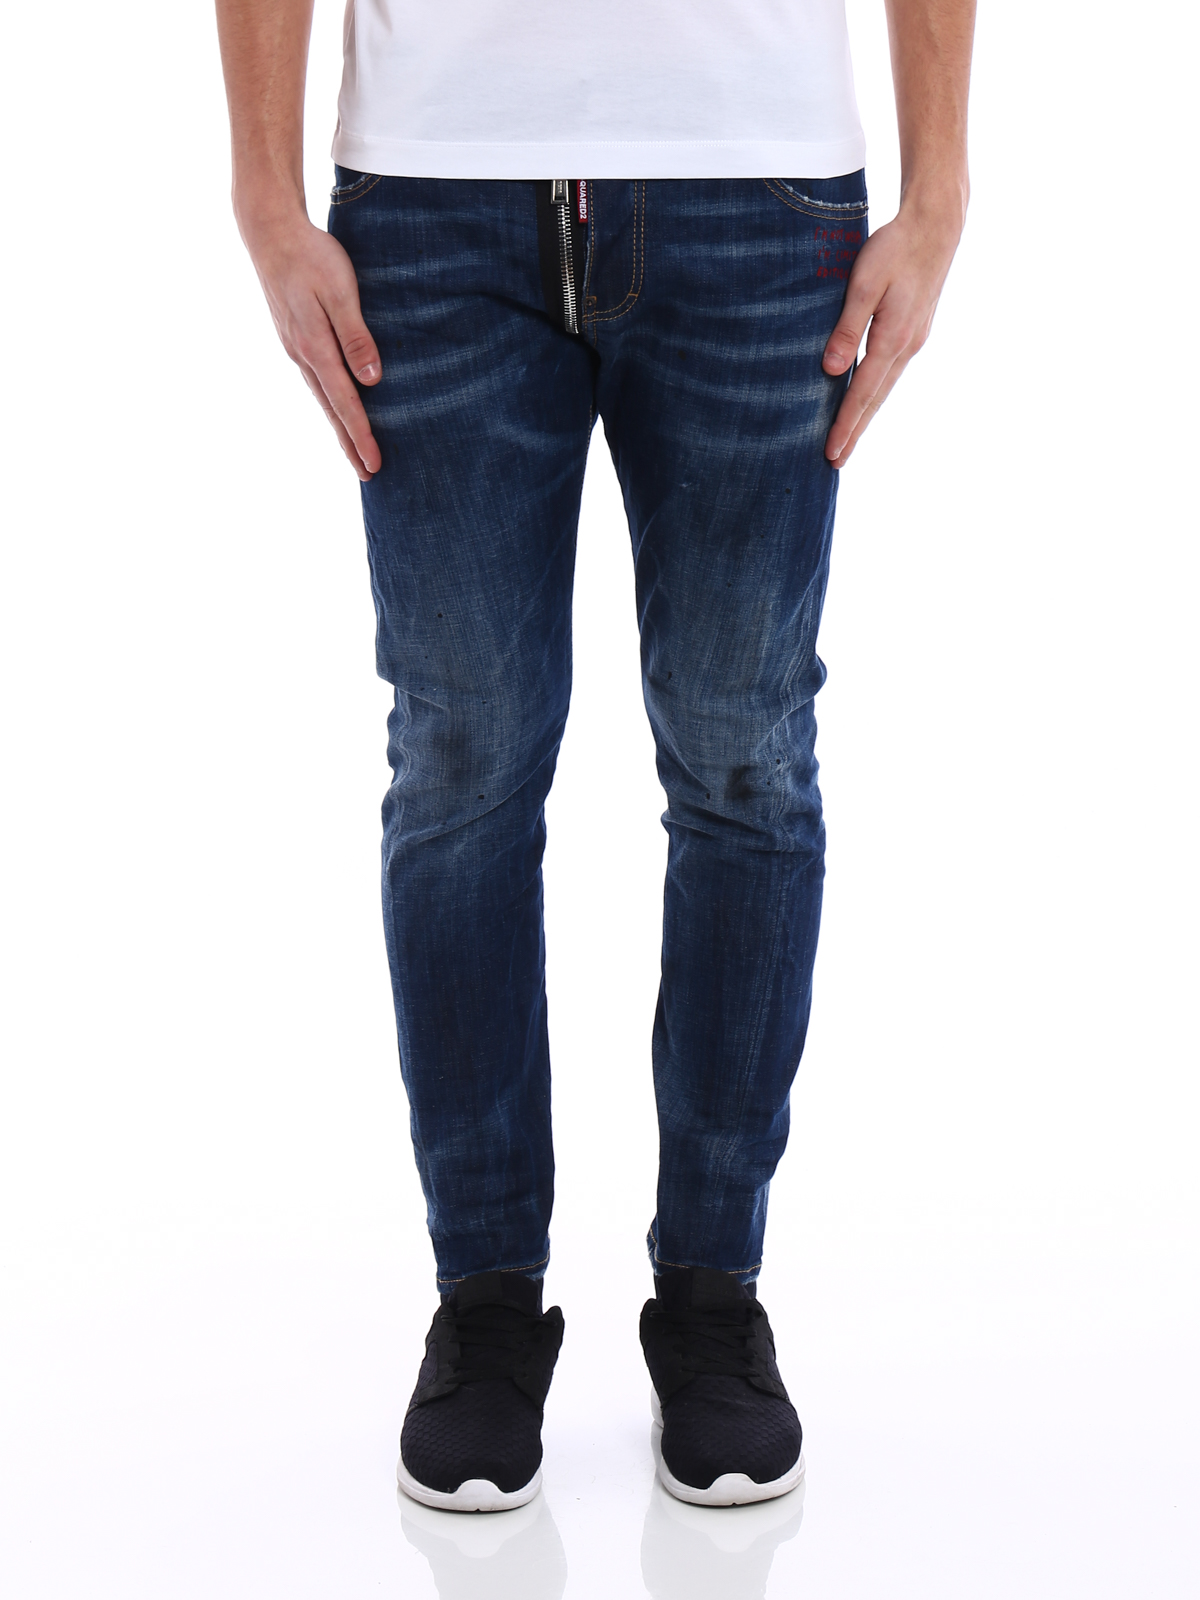 dsquared2 mb jeans